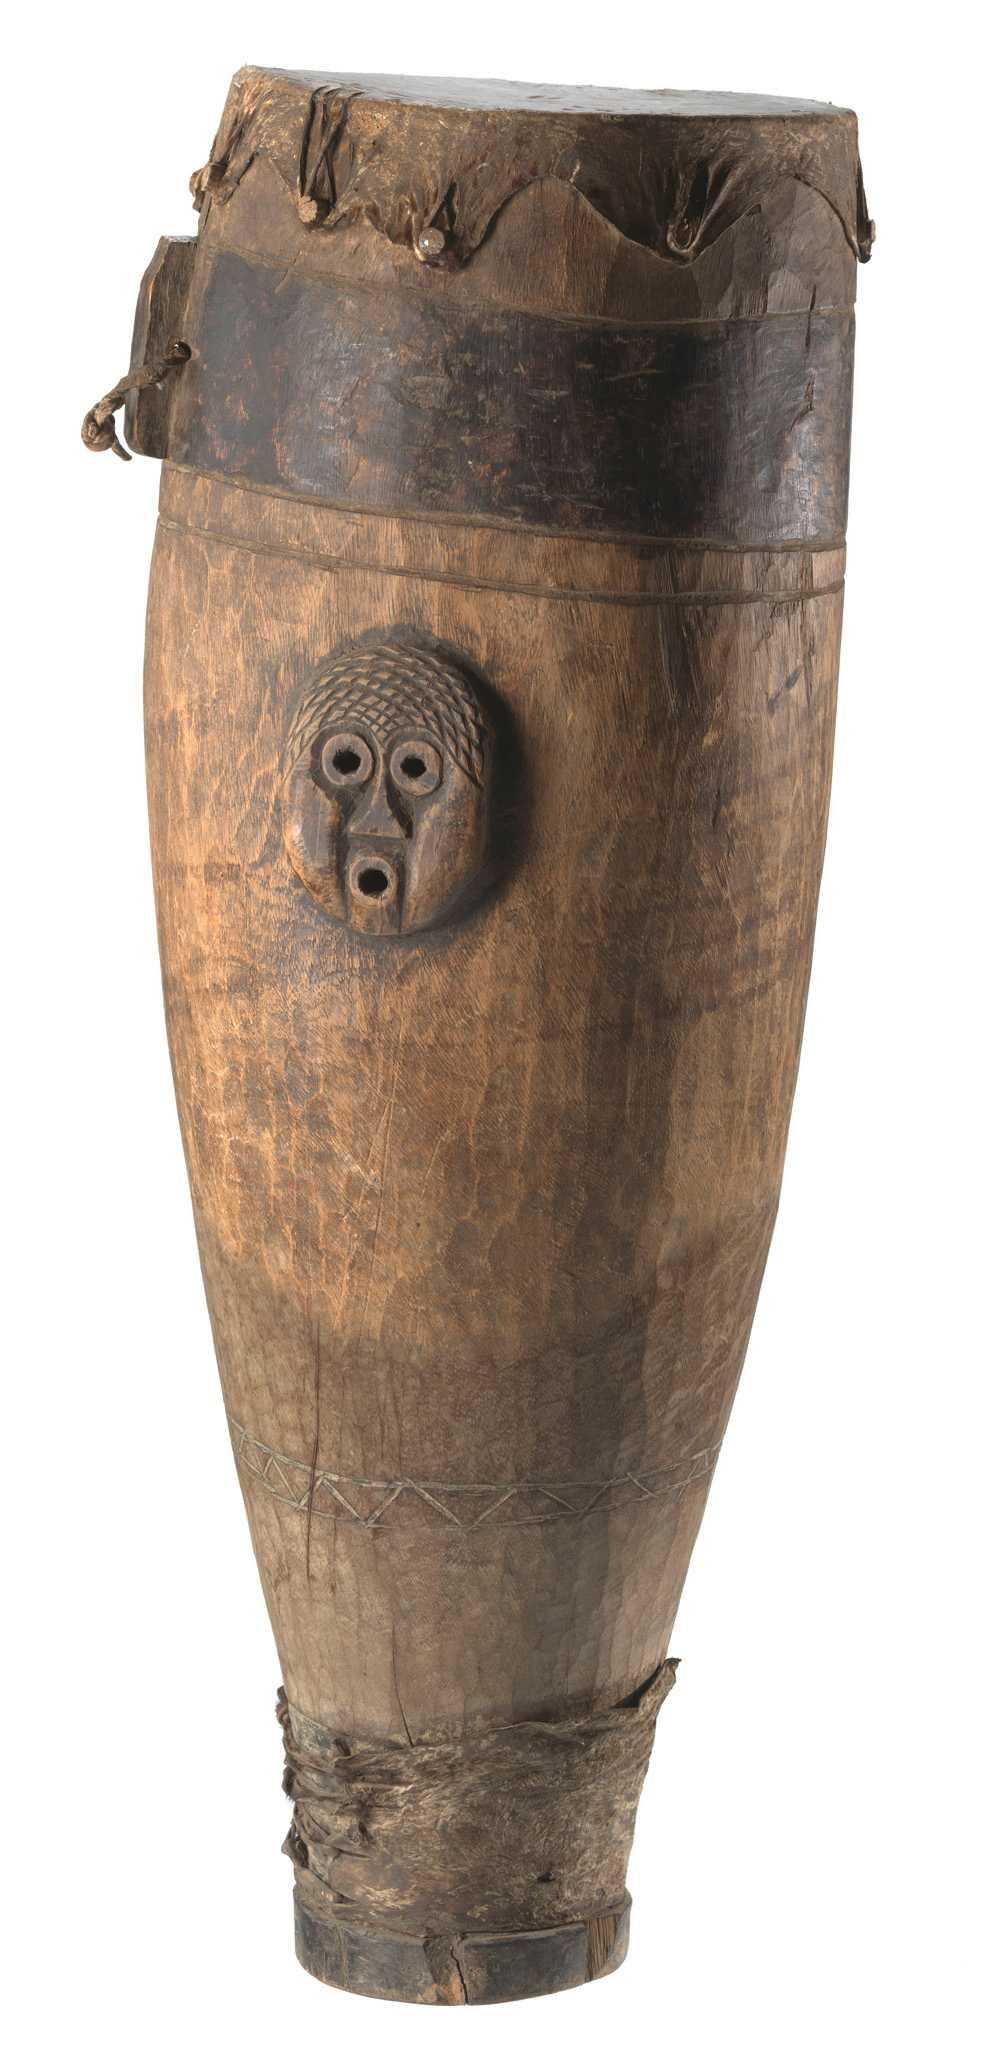 A wooden drum covered with stretched leather hide that has been attached to drum body with nine wooden pegs. Two carved, anthropomorphized face motifs are on opposite sides of the upper half of the drum body. The edges of face motifs have been sealed with a darker adhesive material. There are three bands running the circumference of the drum. The top band closest to the drum head, is stained darker than the rest of the drum body. There is a carved piece that extends from the darker band. It has a round drill hole  that had been threaded through with a leather thong. This piece has been stained the same color as the bank. The middle band is directly below the top band and above the face motifs. It is the same color as the rest of the body. The bottom band is a carved triangular pattern between two parallel lines. The bottom band is located near the base of the drum, above a piece of hide wrapped and tied around the very bottom of the drum body. There is a nail visible in drum body interior.